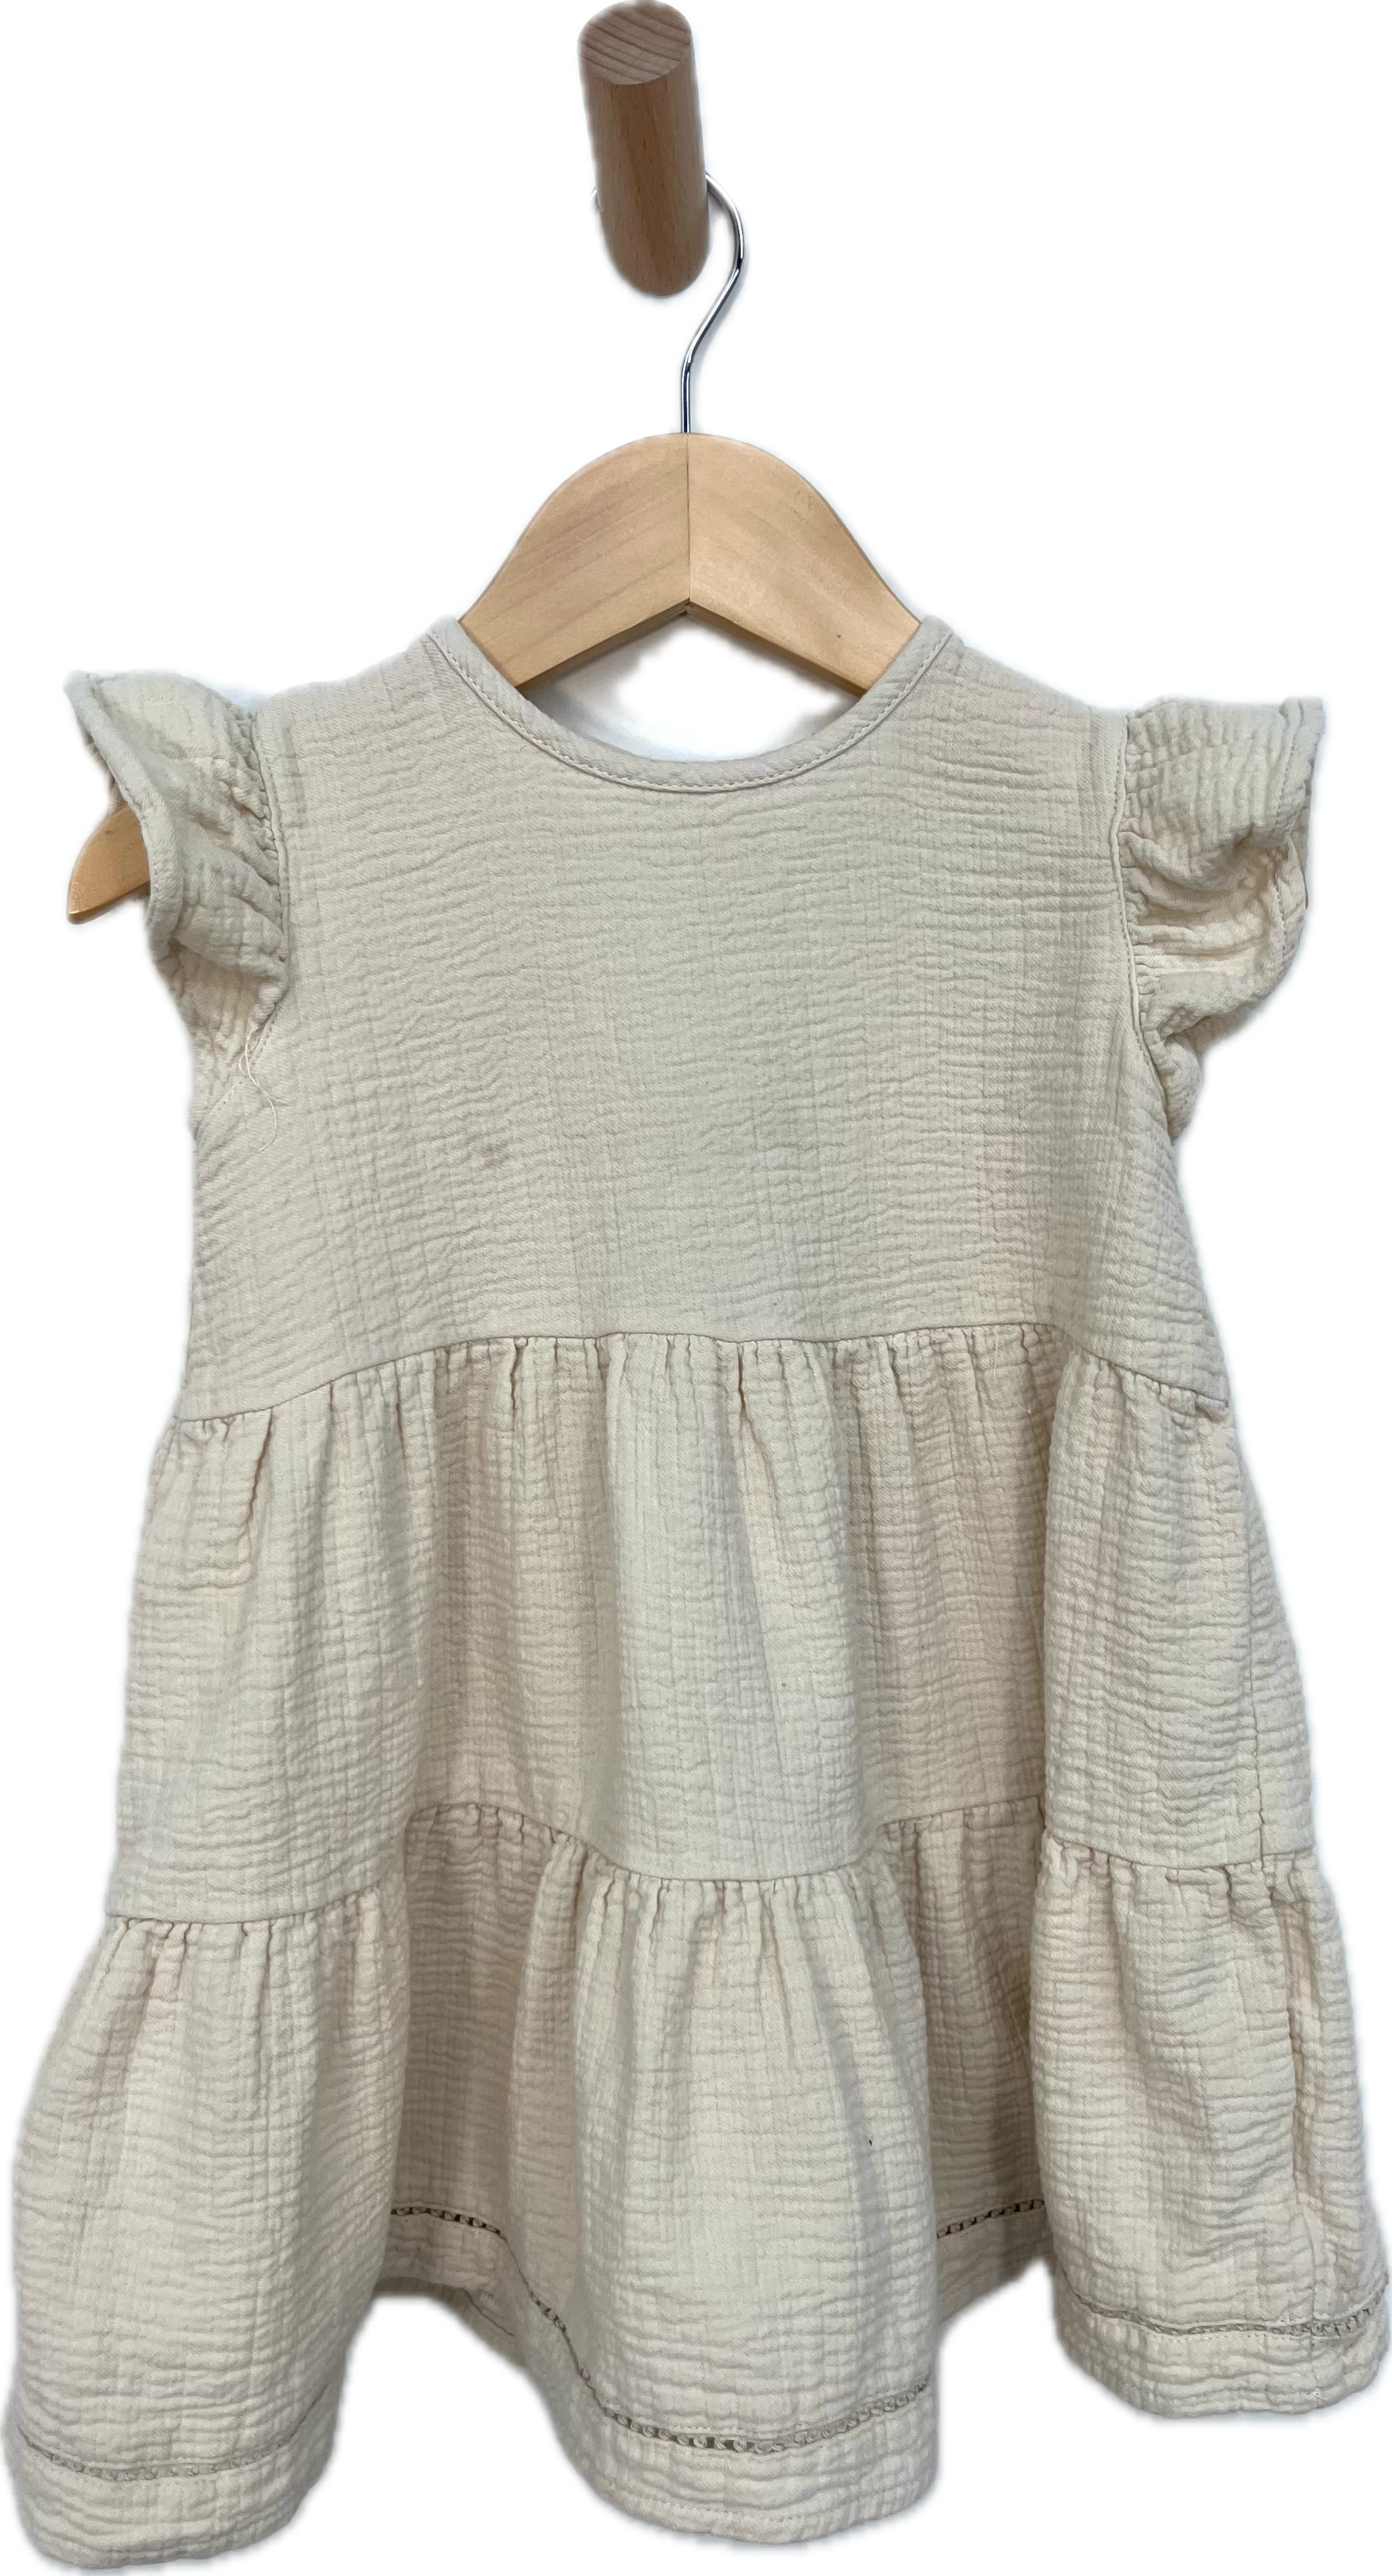 quincy mae crinkled cotton tiered dress 2T